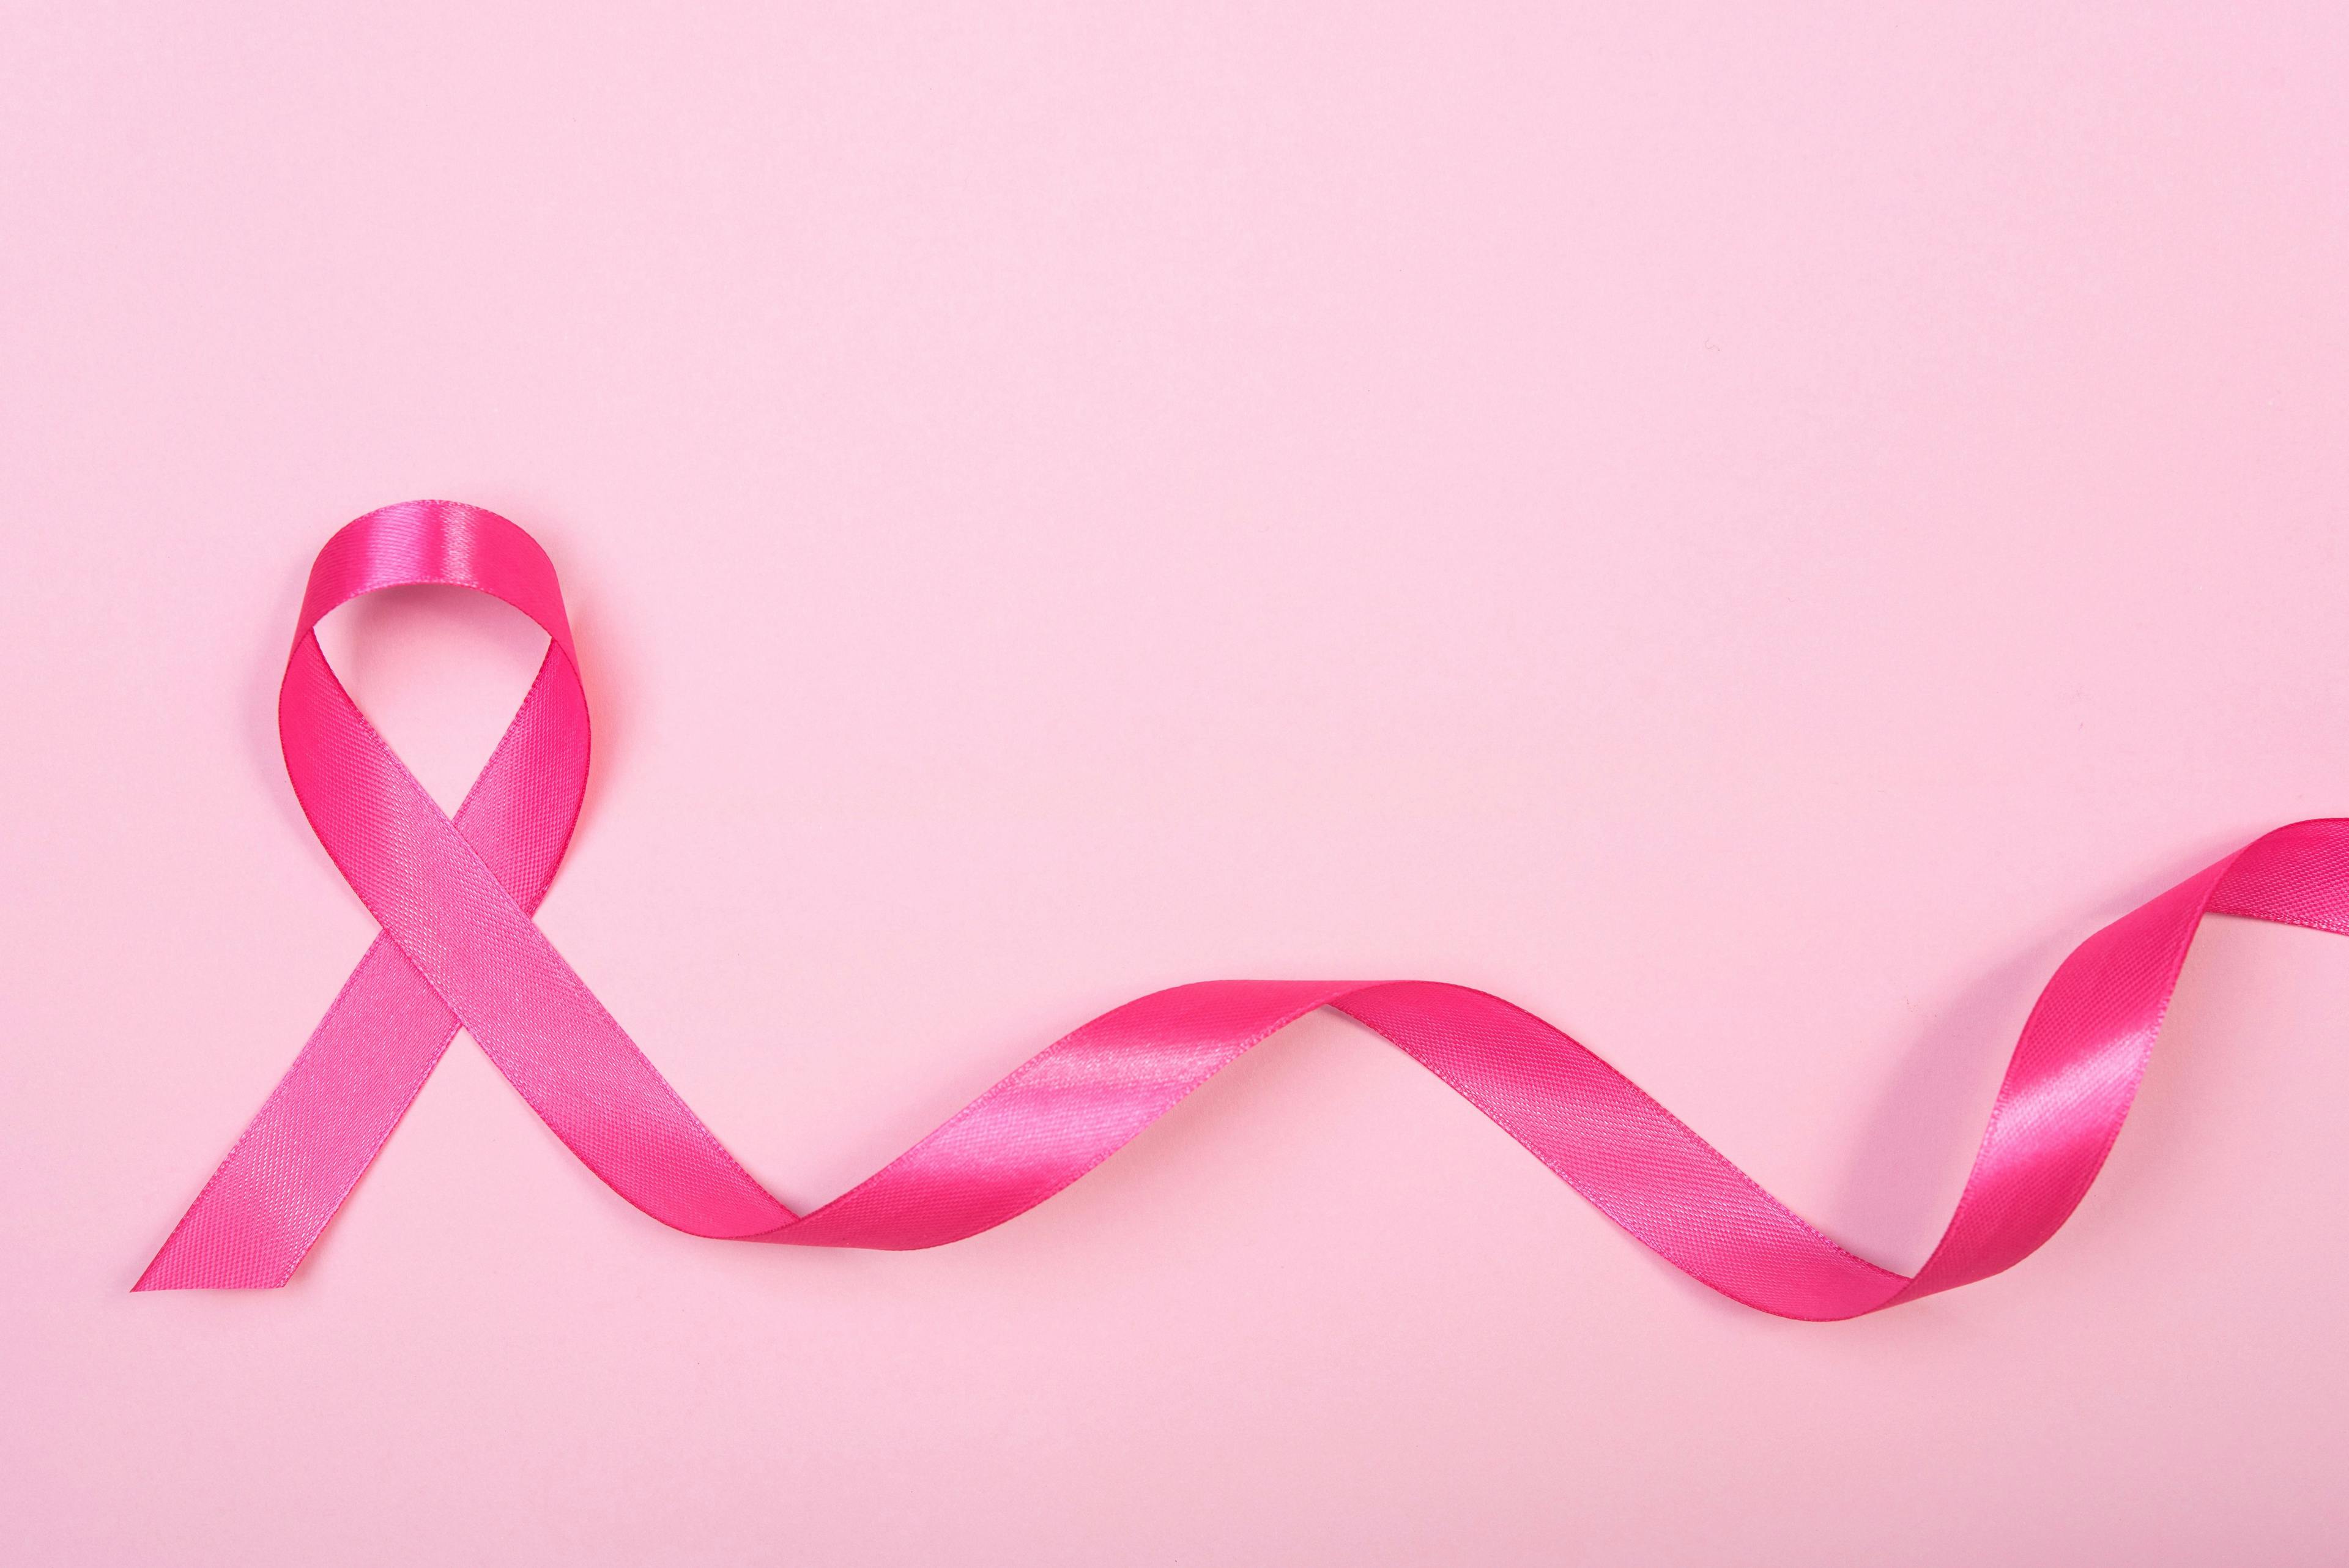 Exogenous hormone use not associated with increased breast cancer risk: © NaMong Productions - stock.adobe.com